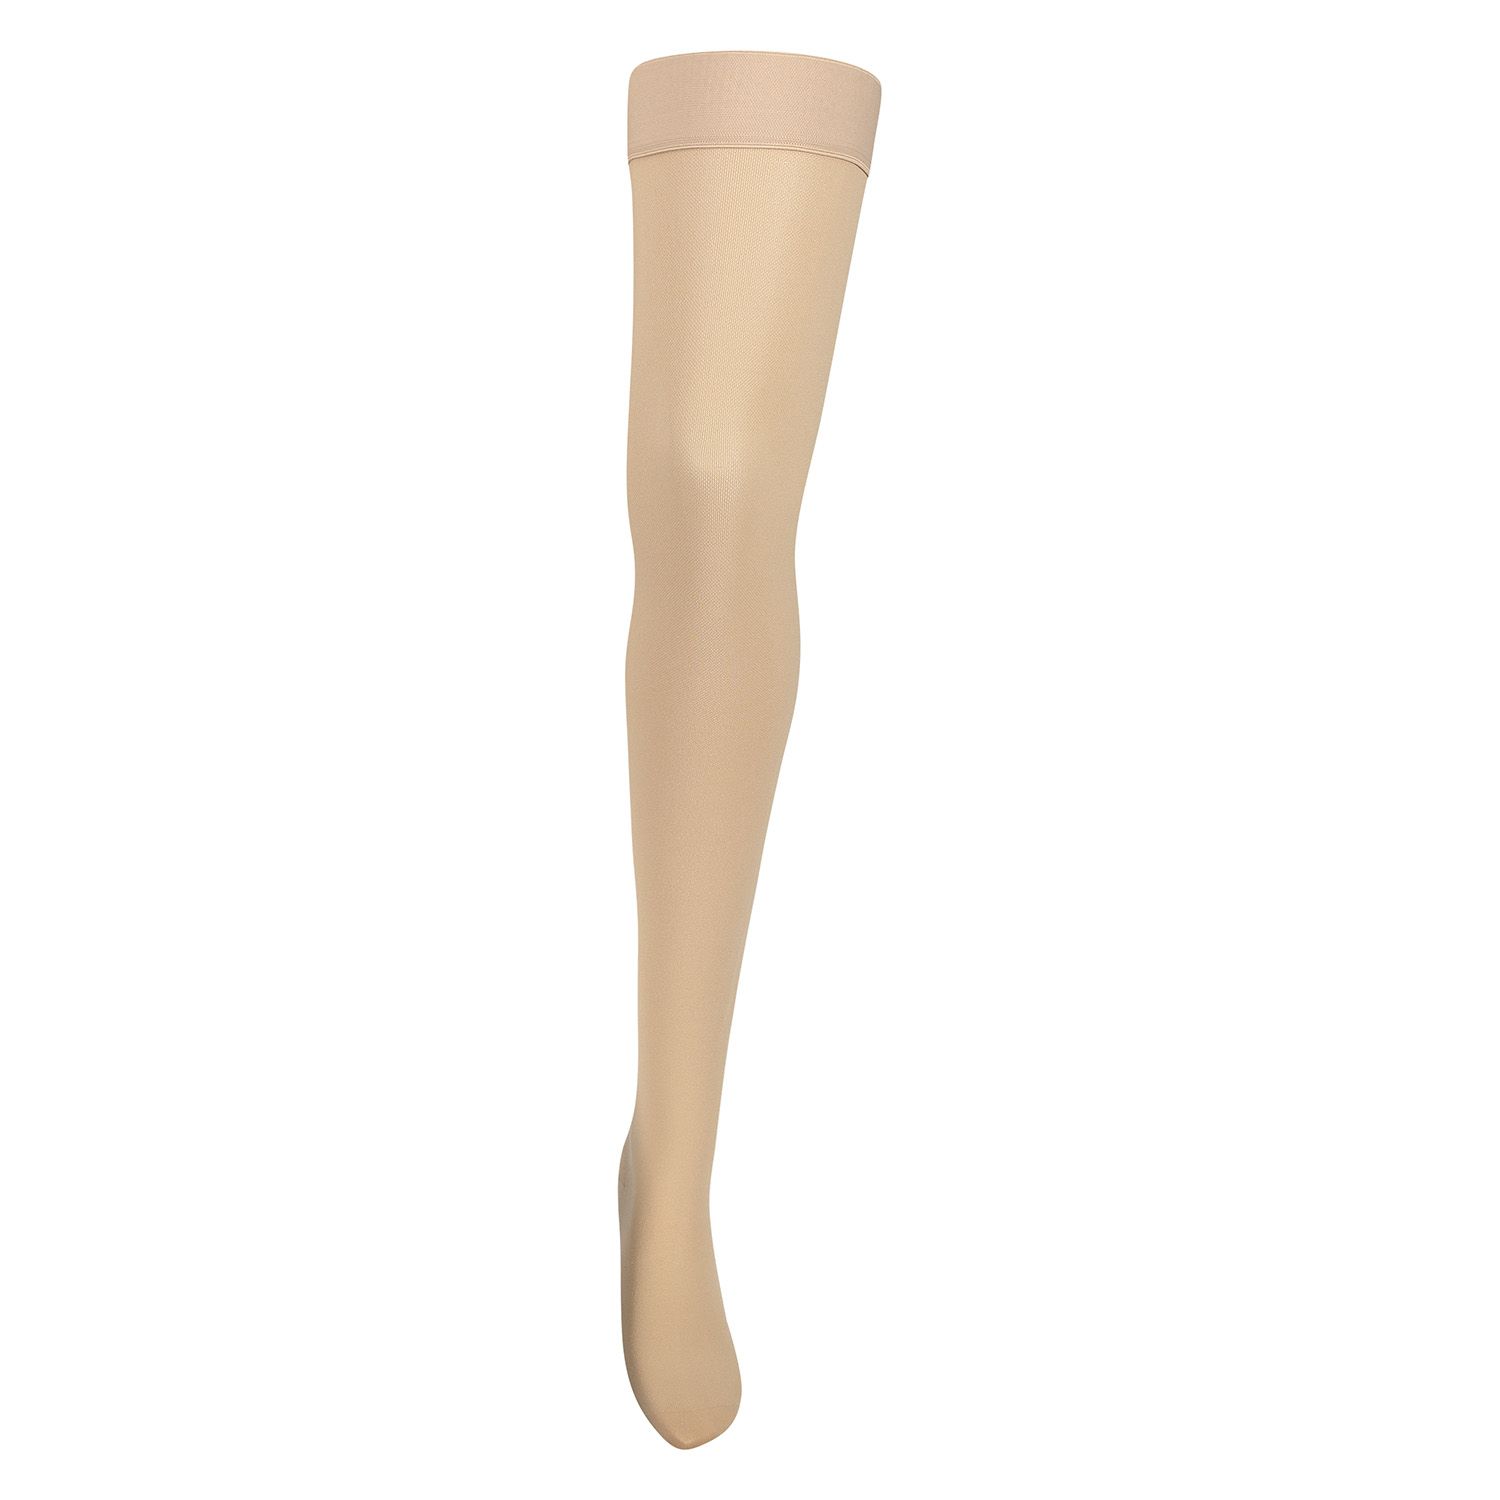 dunimed premium comfort compression stockings groin length closed toe